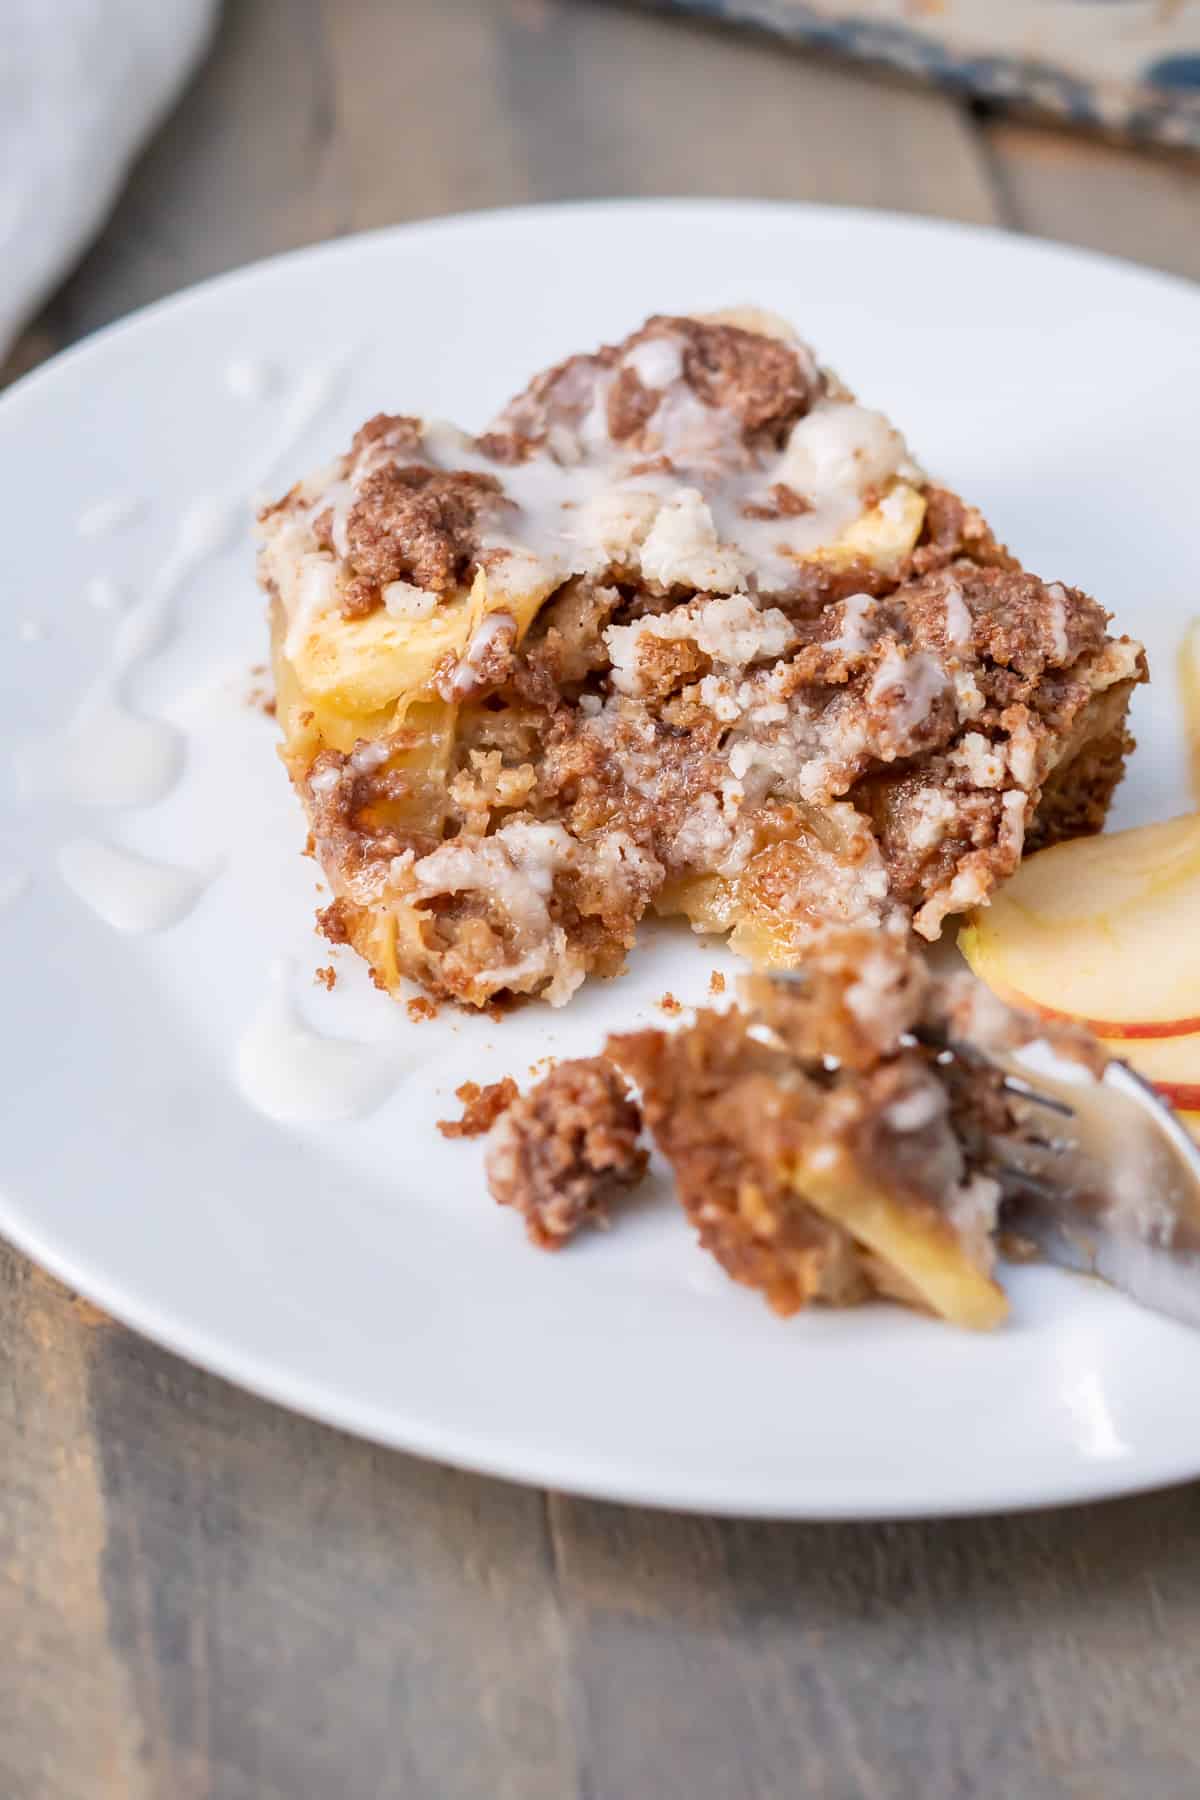 Side view of a square piece of gluten free apple coffee cake with a bite removed to show the soft cake, apple, and crumble layers.